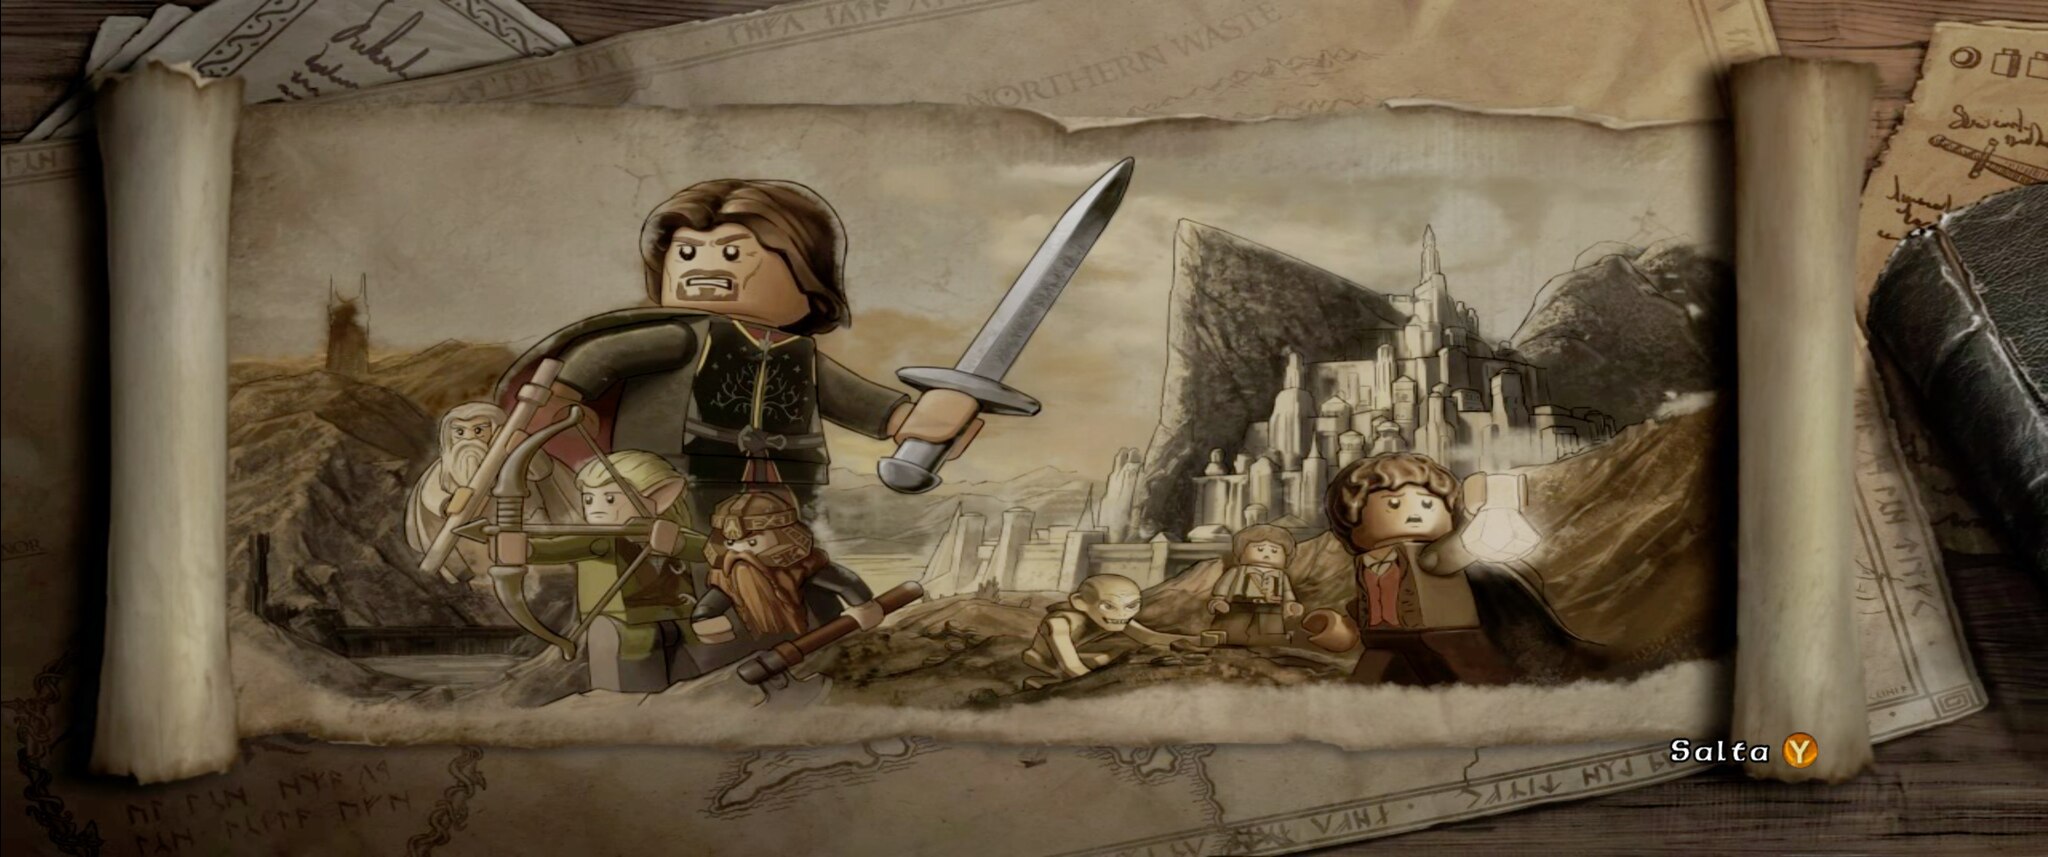 cheat codes for lego lord of the rings gom